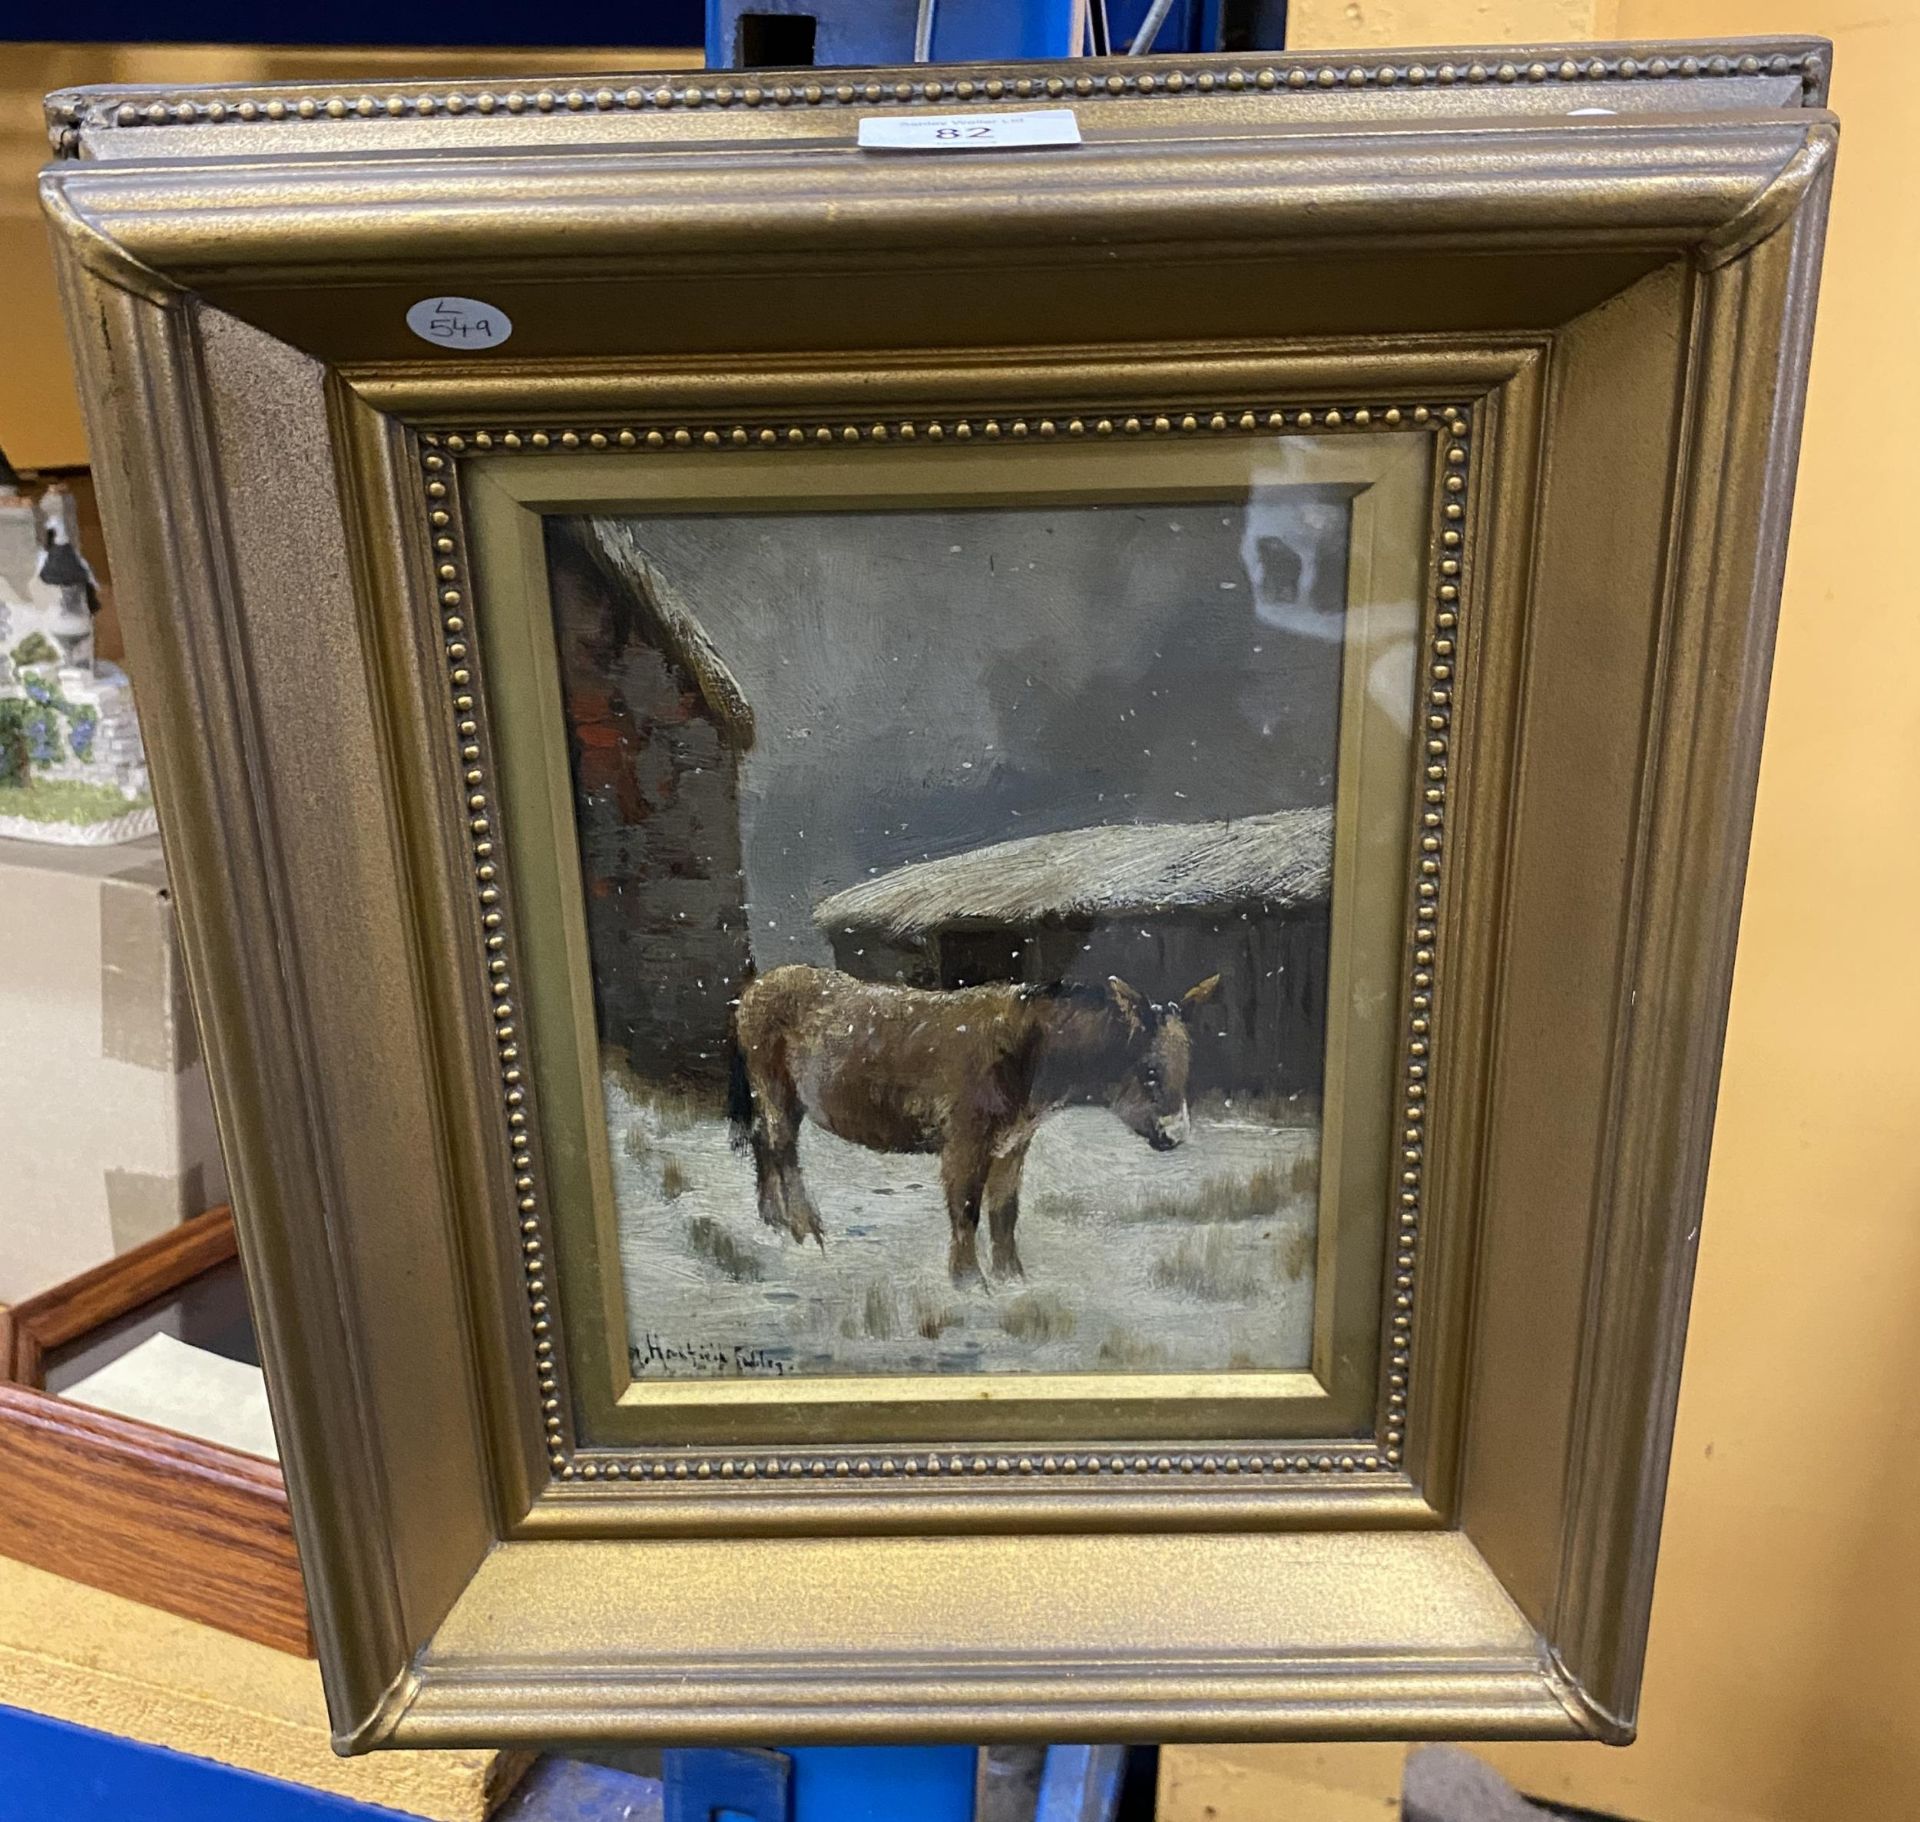 A HENRY HADFIELD CUBLEY, BRITISH, (1858-1934) GILT FRAMED OIL PAINTING OF A DONKEY, 39 X 34CM